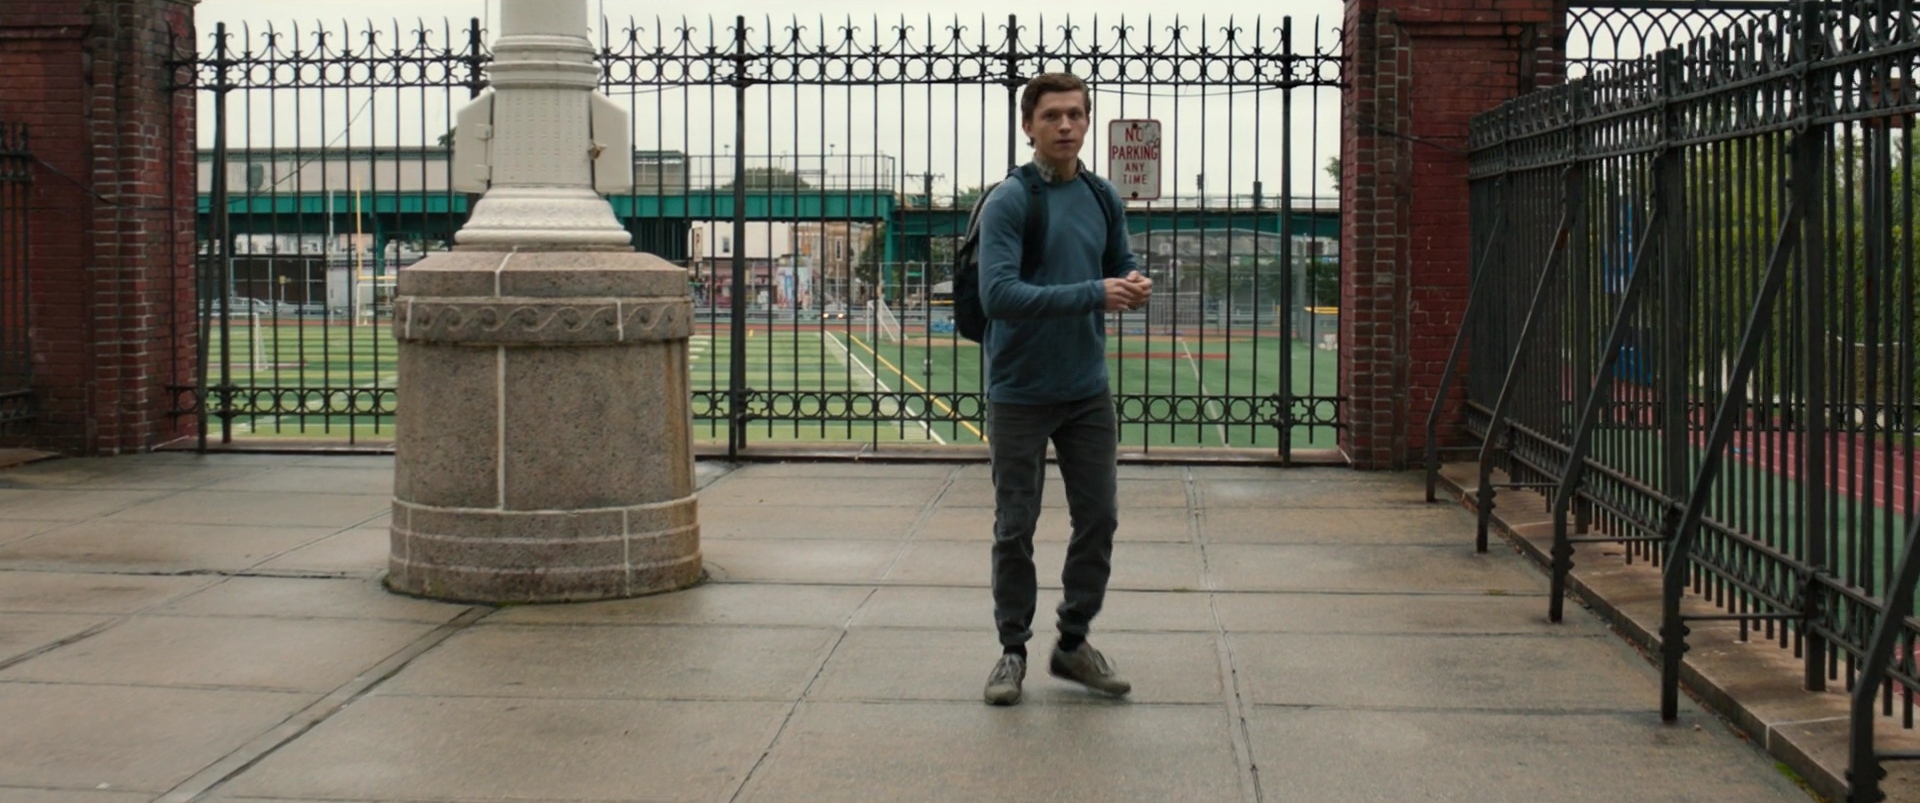 New Balance Shoes Worn by Tom Holland in Spider-Man: Homecoming (2017) Movie1920 x 803